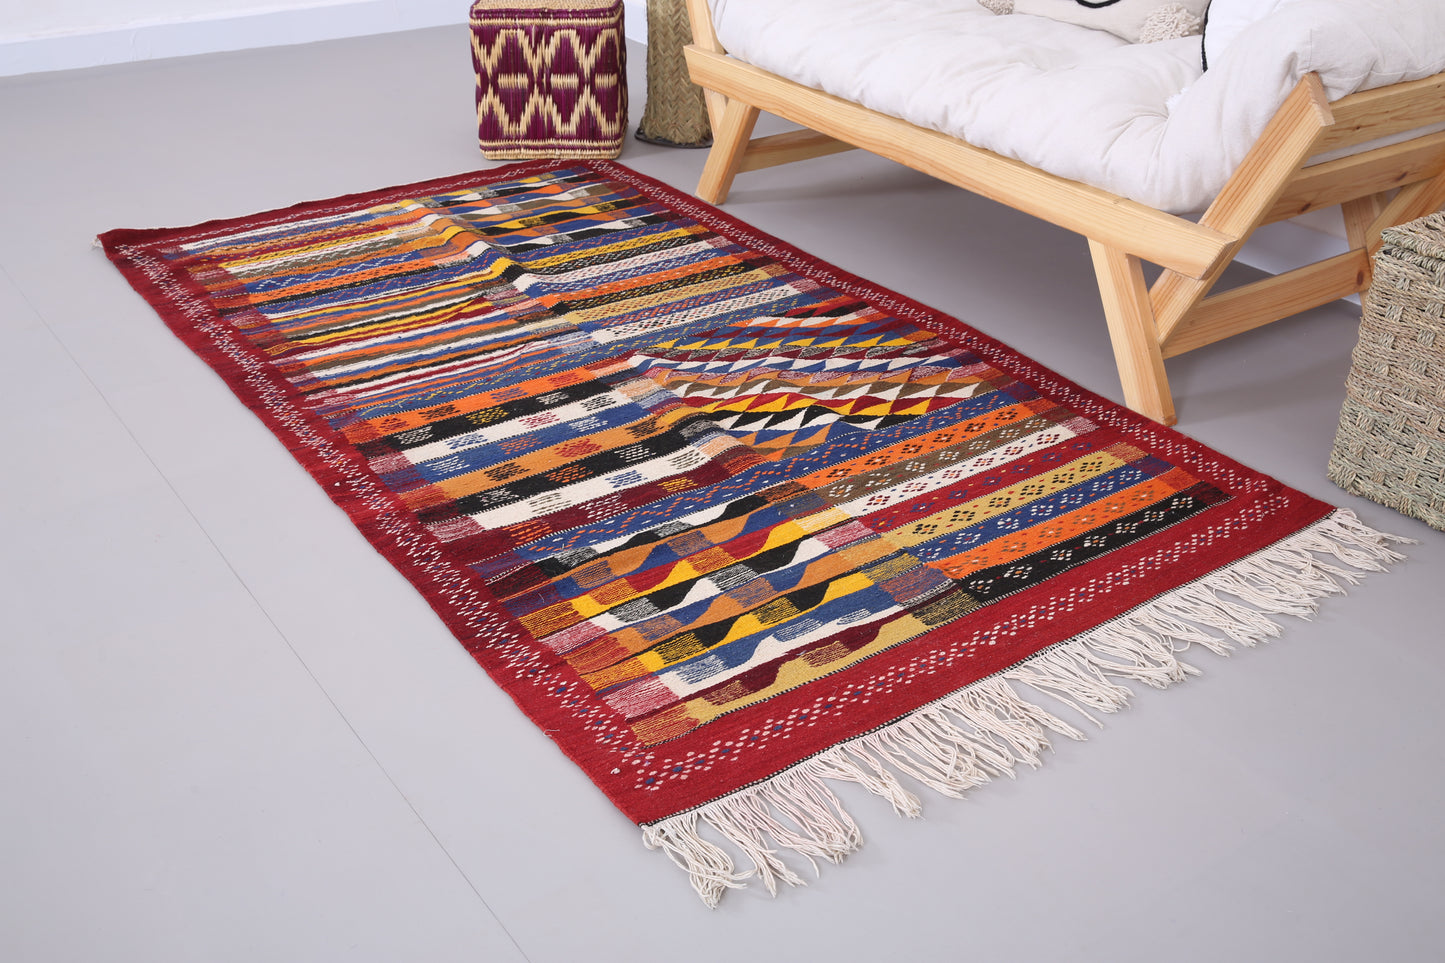 Handwoven picasso kilim rug 3.7 FT X 6.5 FT